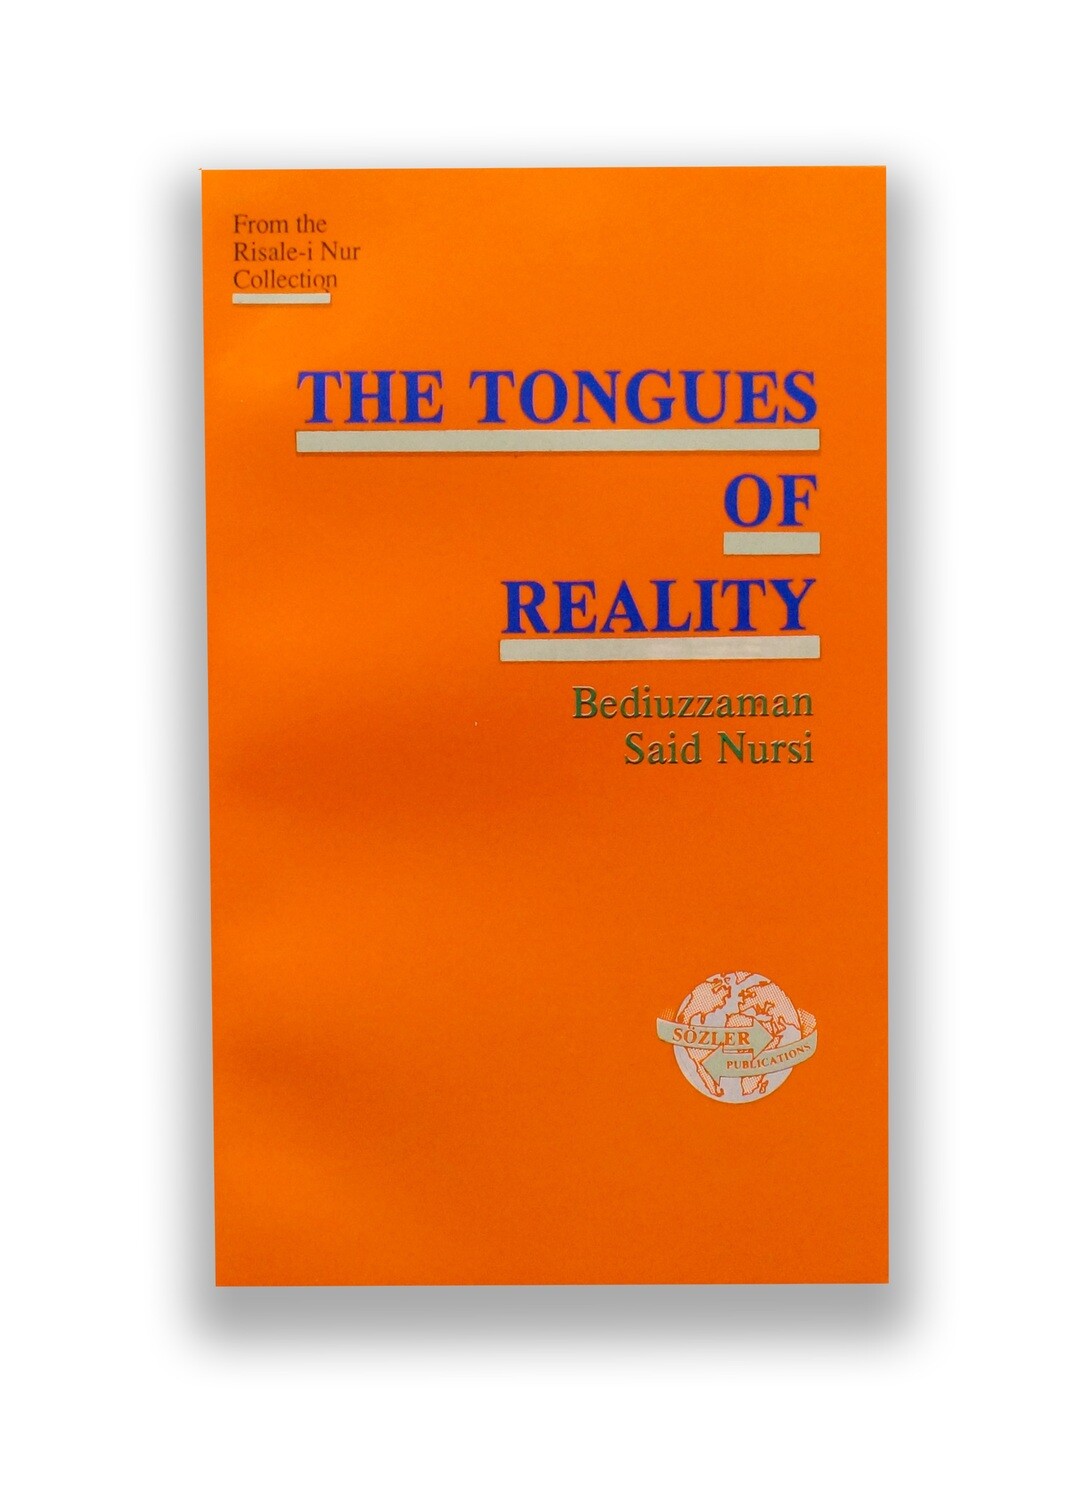 The Tongues of Reality